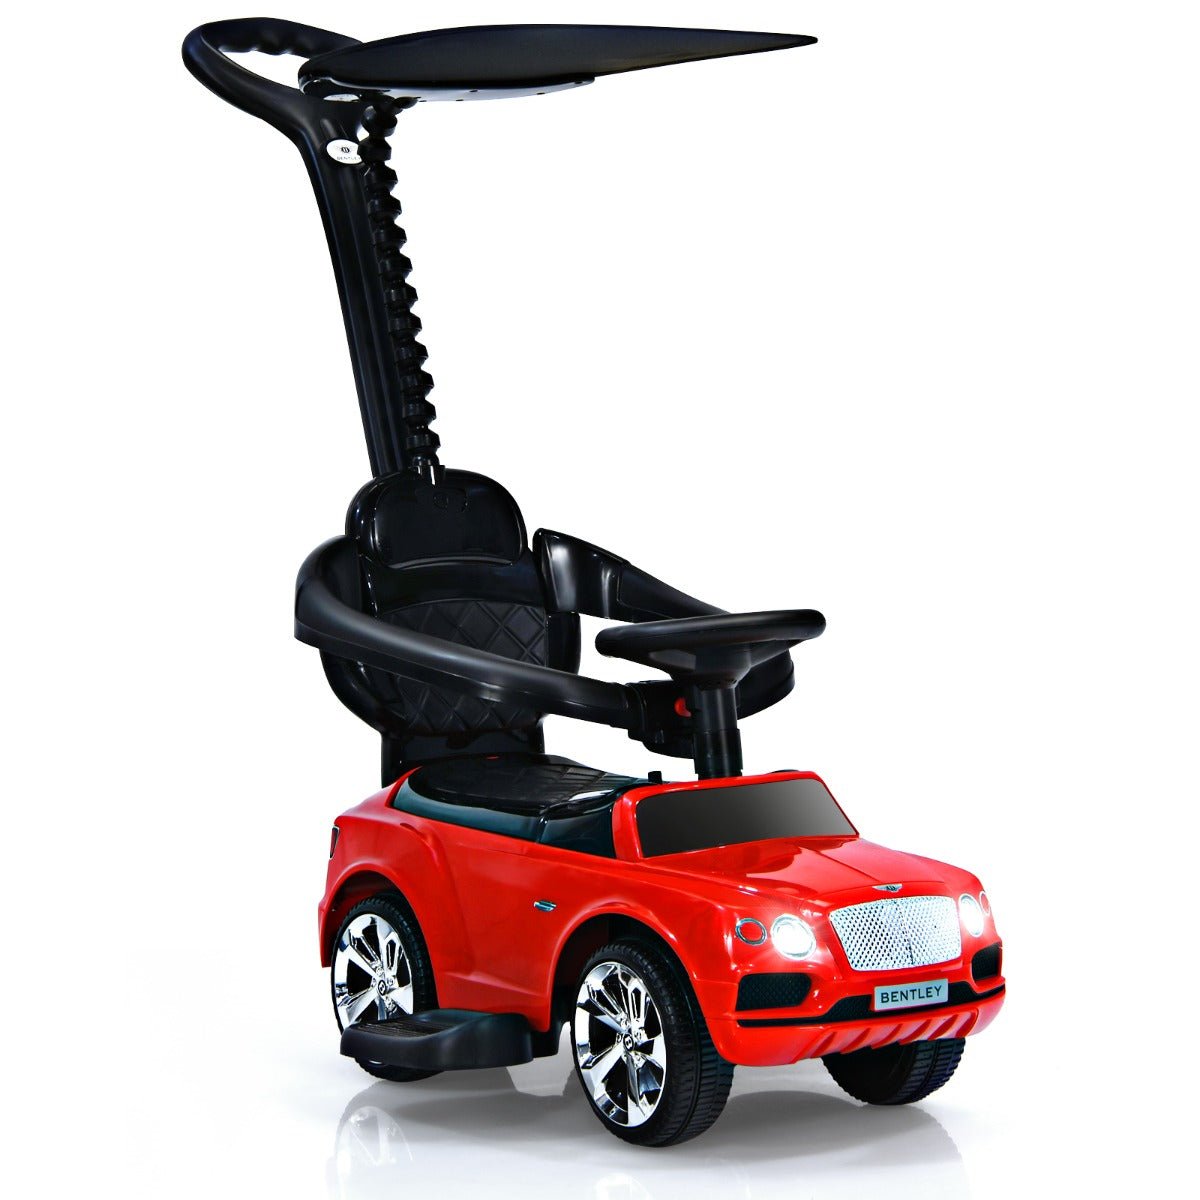 Licensed Kids Ride On Car: Bentley Push Car with Canopy